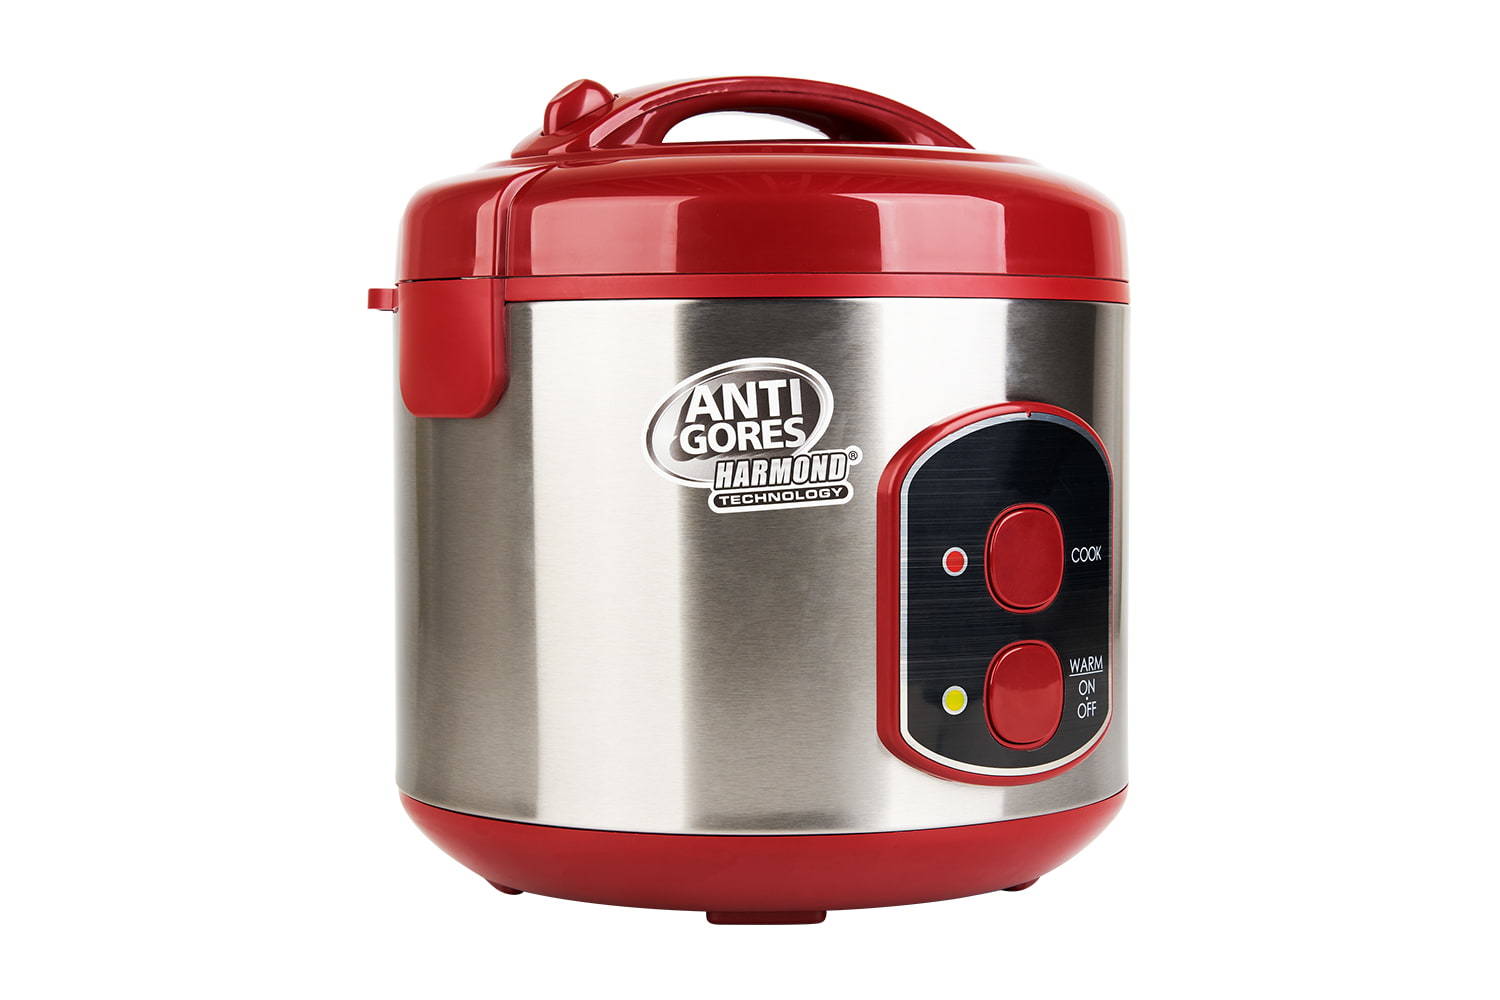 Rice Cooker YYF-50YJ06, One click start, simple operation